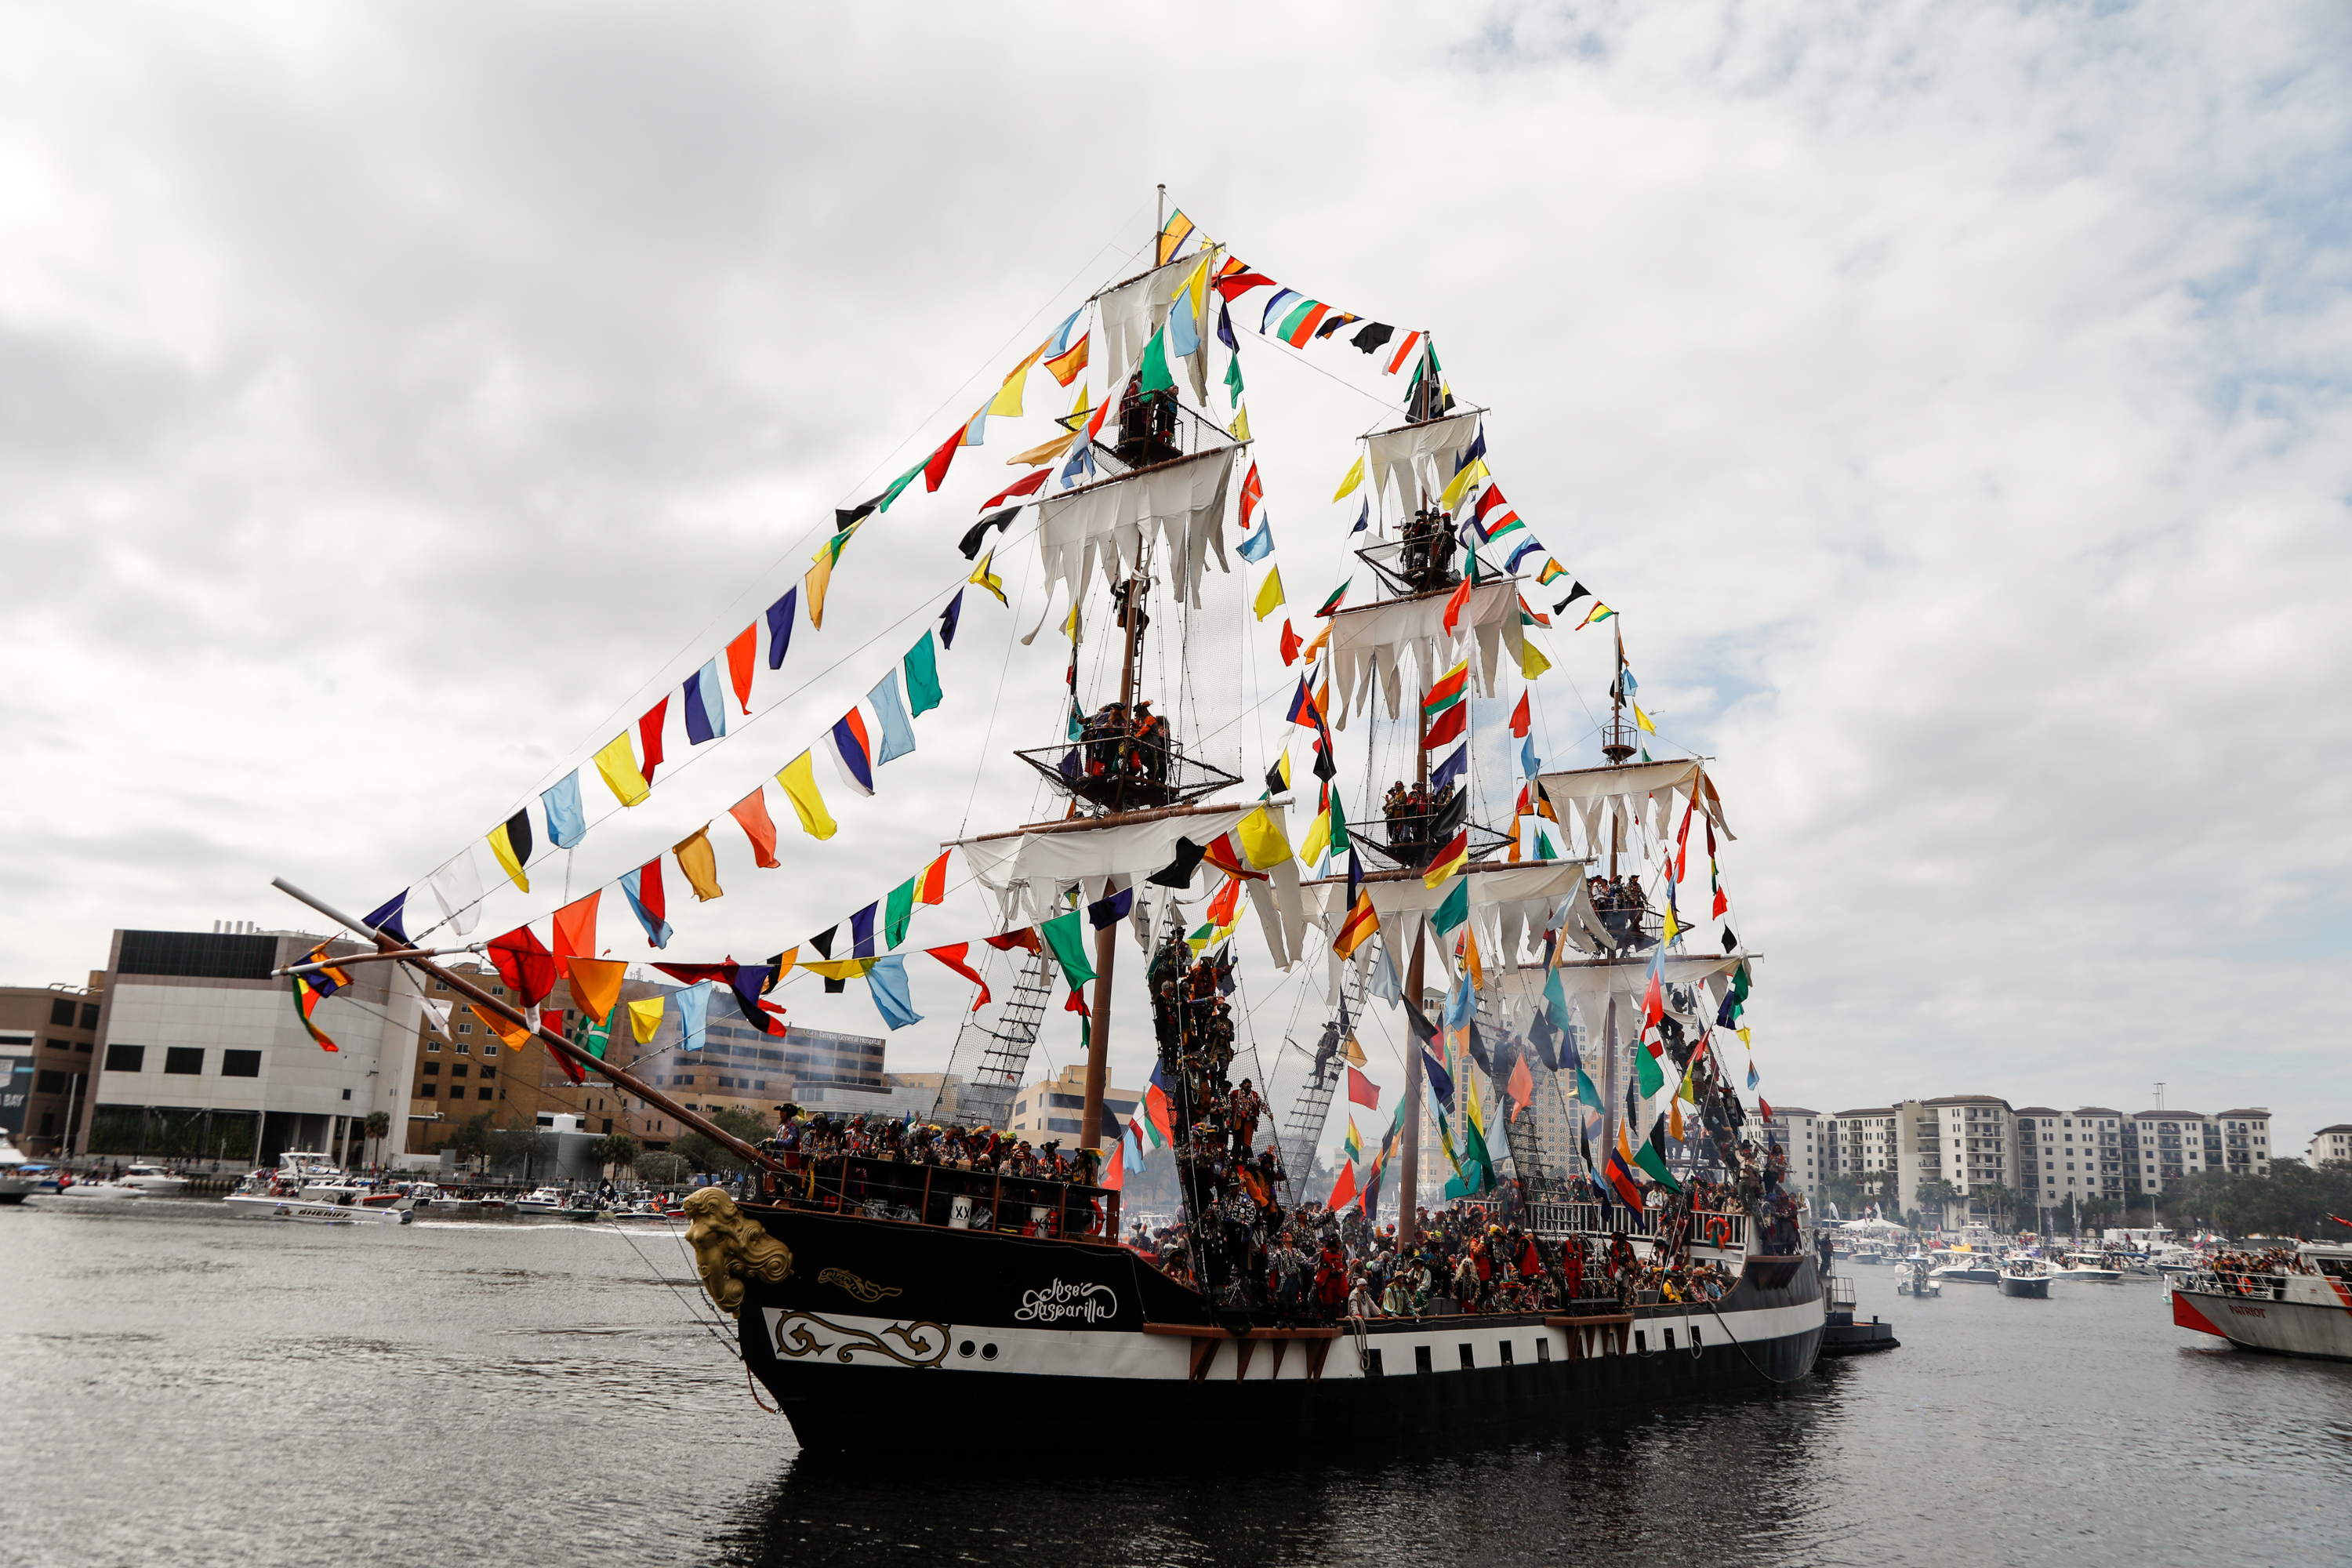 39 Gasparilla events happening in the Tampa Bay area this month